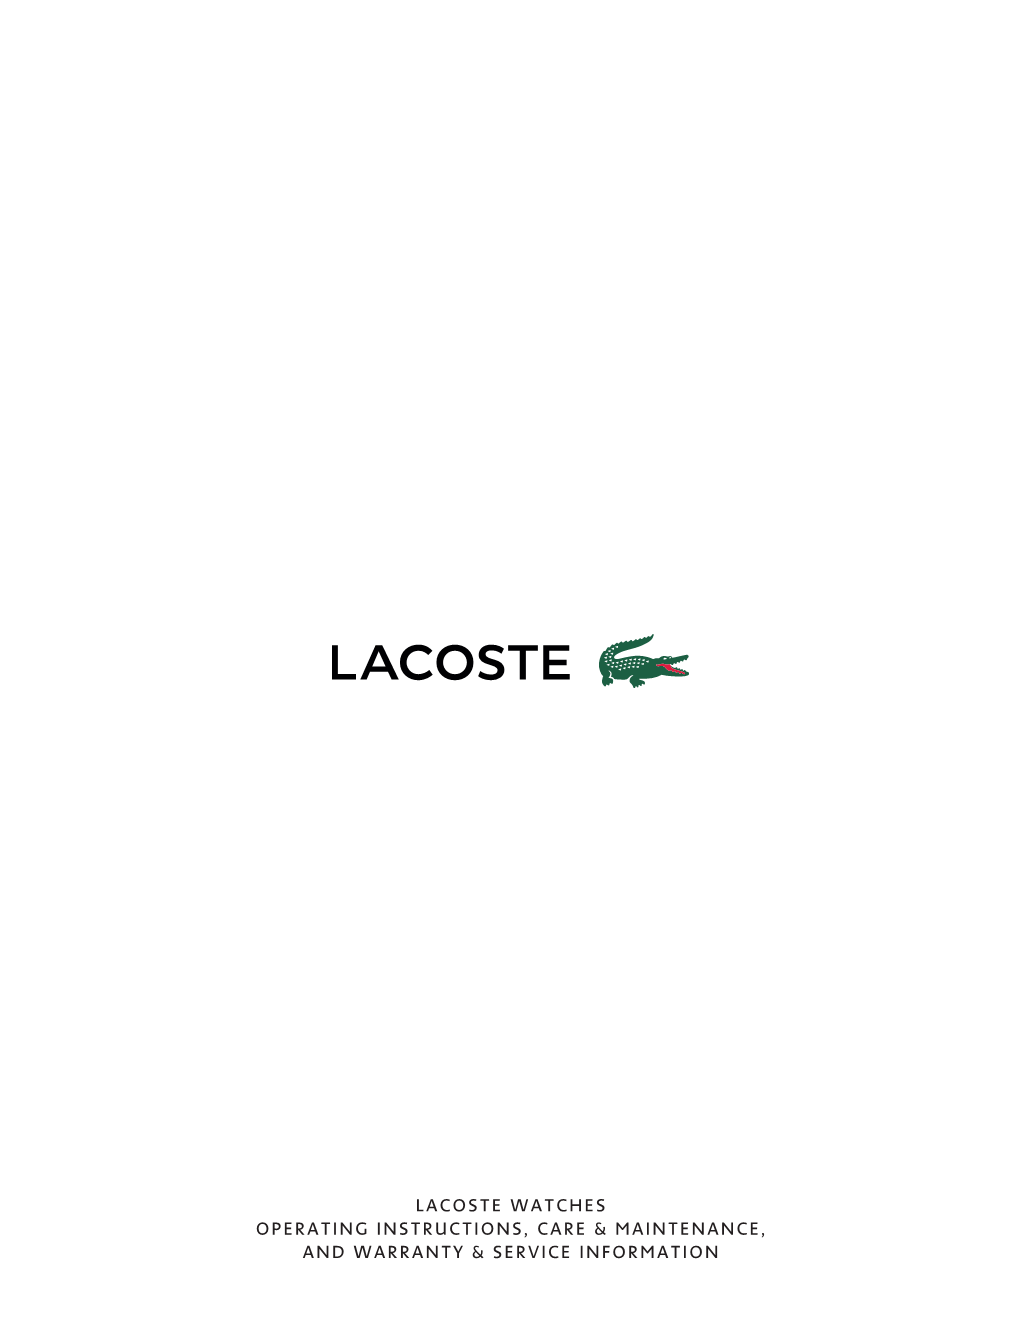 Lacoste Watches Operating Instructions, Care & Maintenance, and Warranty & Service Information